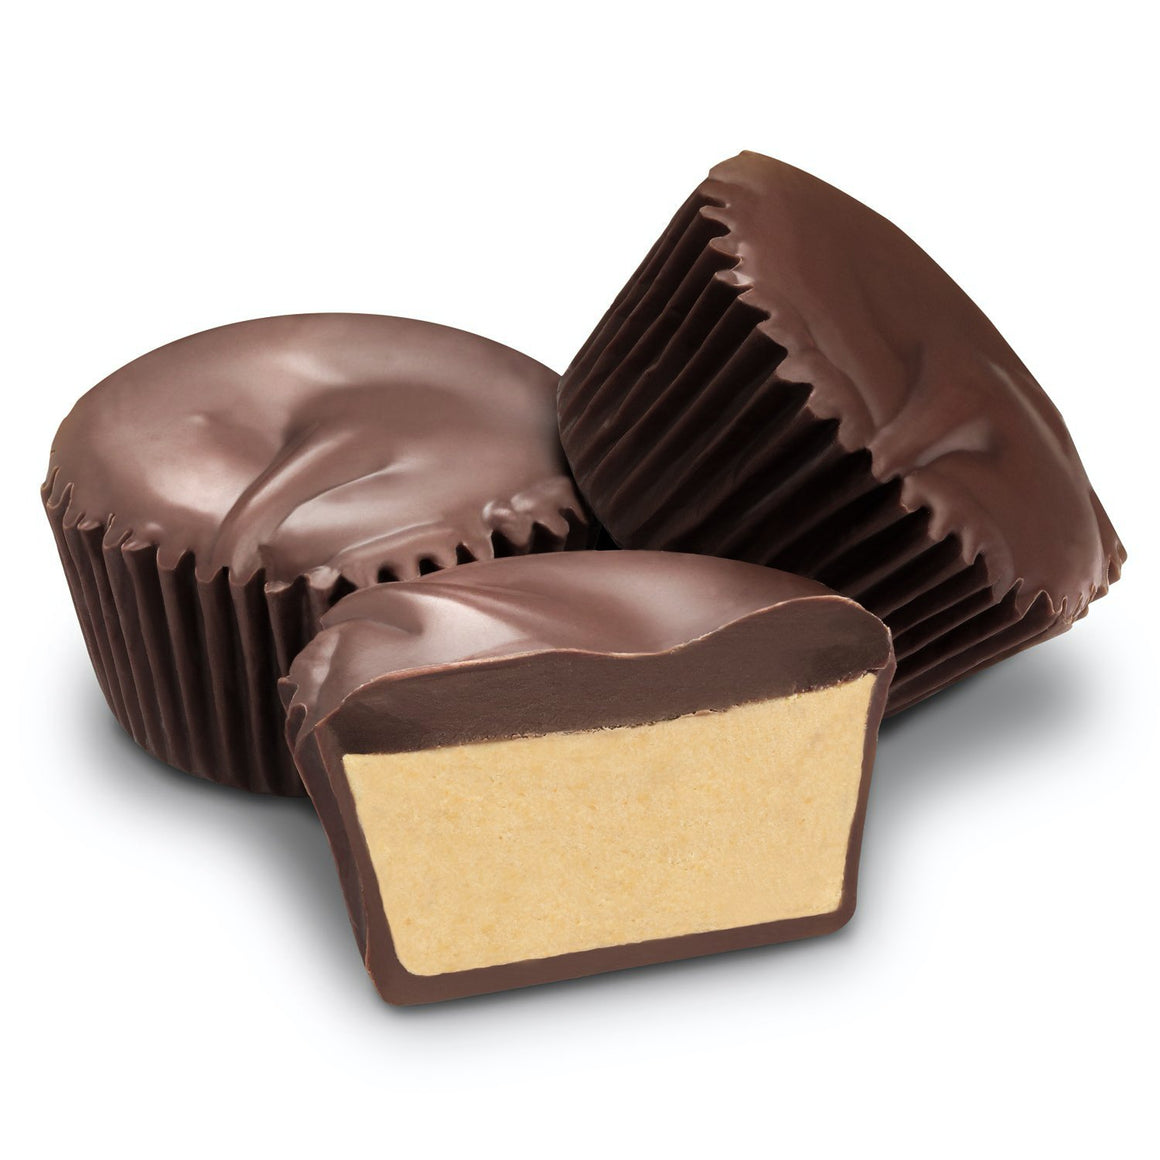 All City Candy Dark Chocolate Giant Peanut Butter Cups - 1 lb. Box Chocolate Albanese Confectionery For fresh candy and great service, visit www.allcitycandy.com